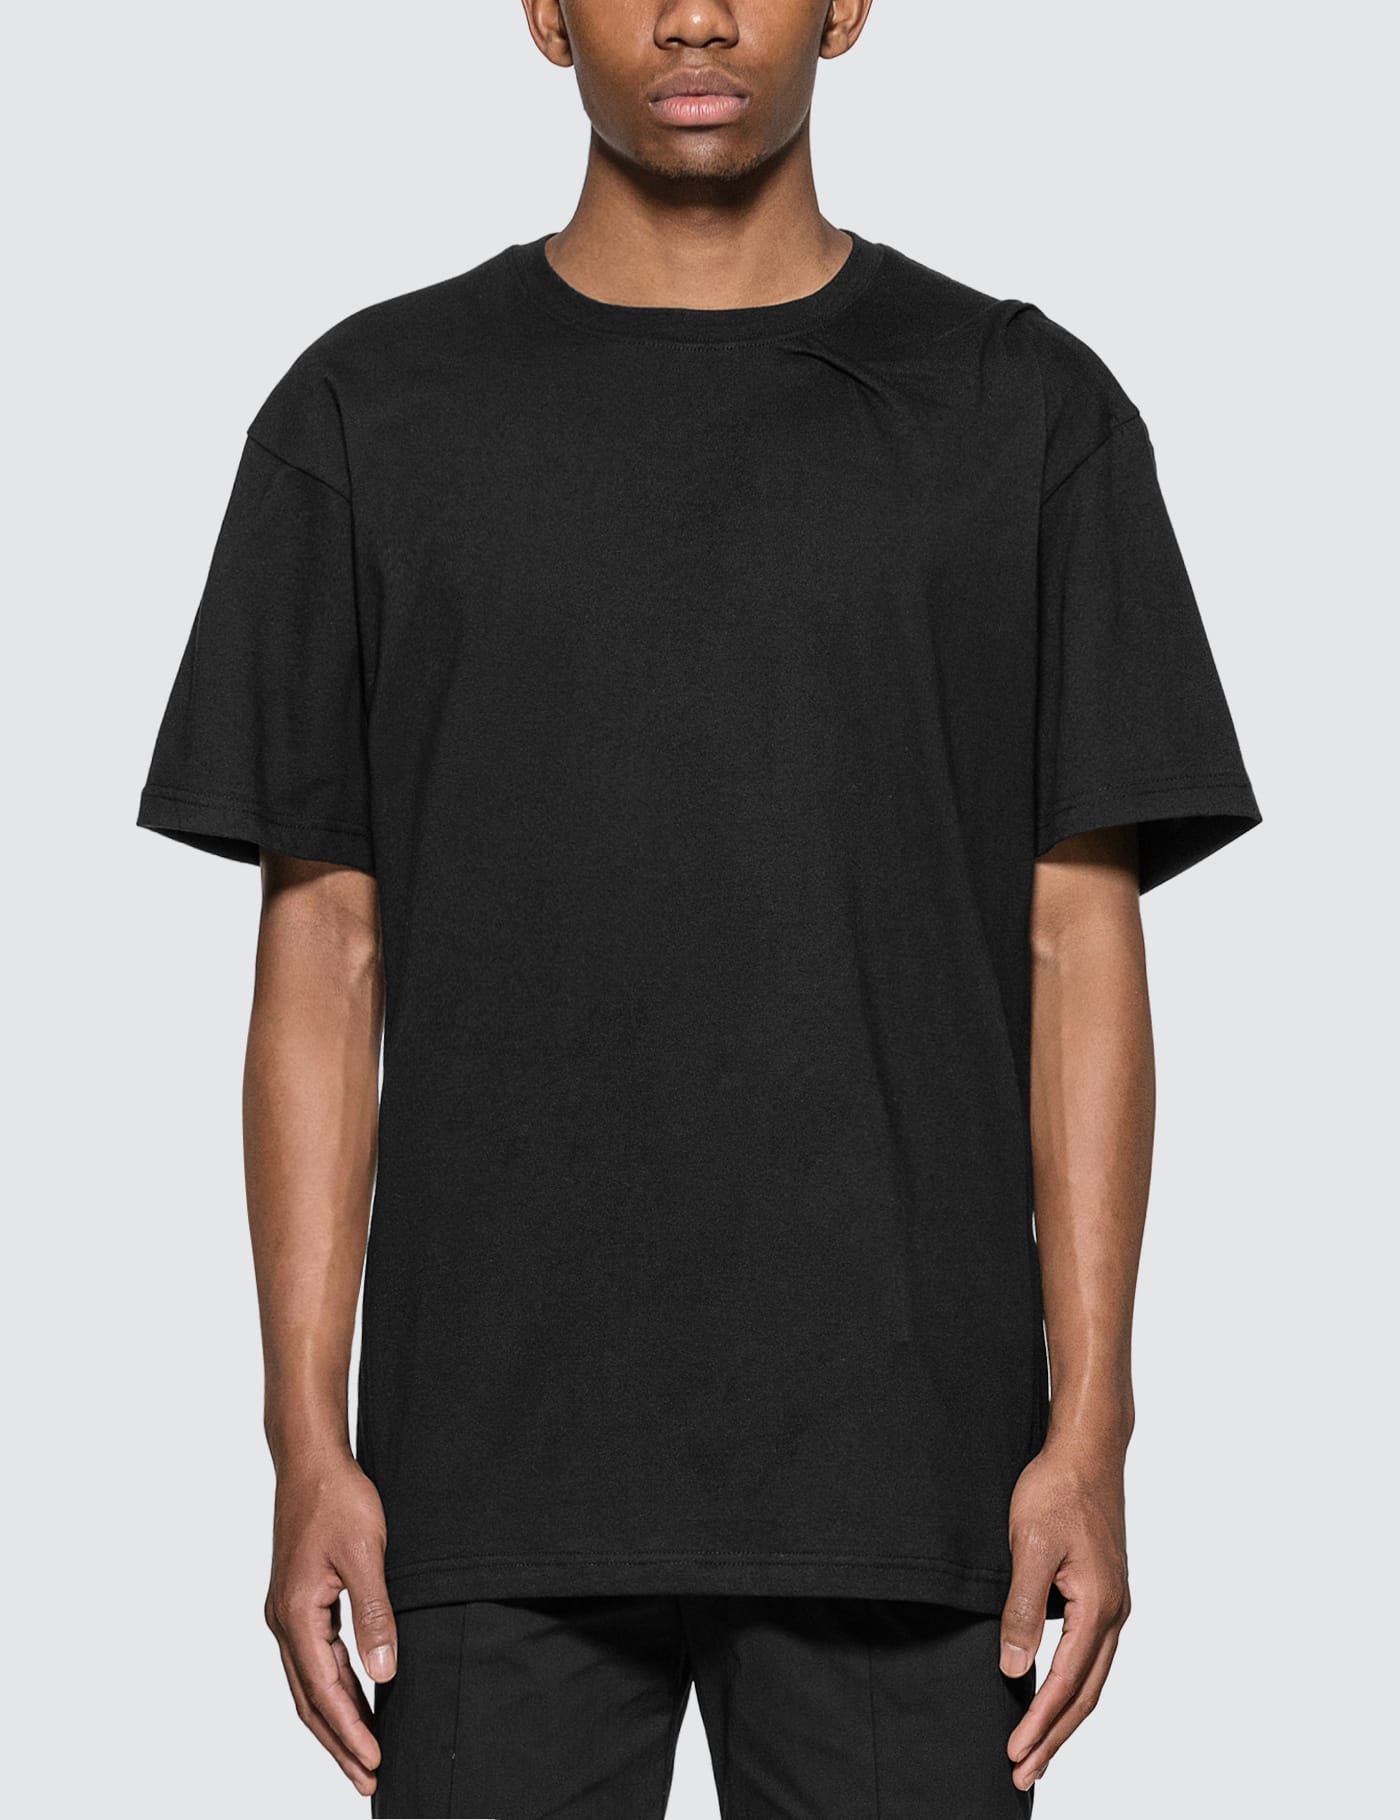 POST ARCHIVE FACTION (PAF) - 3.0 Sleeve 1/2 Right T-Shirt | HBX 